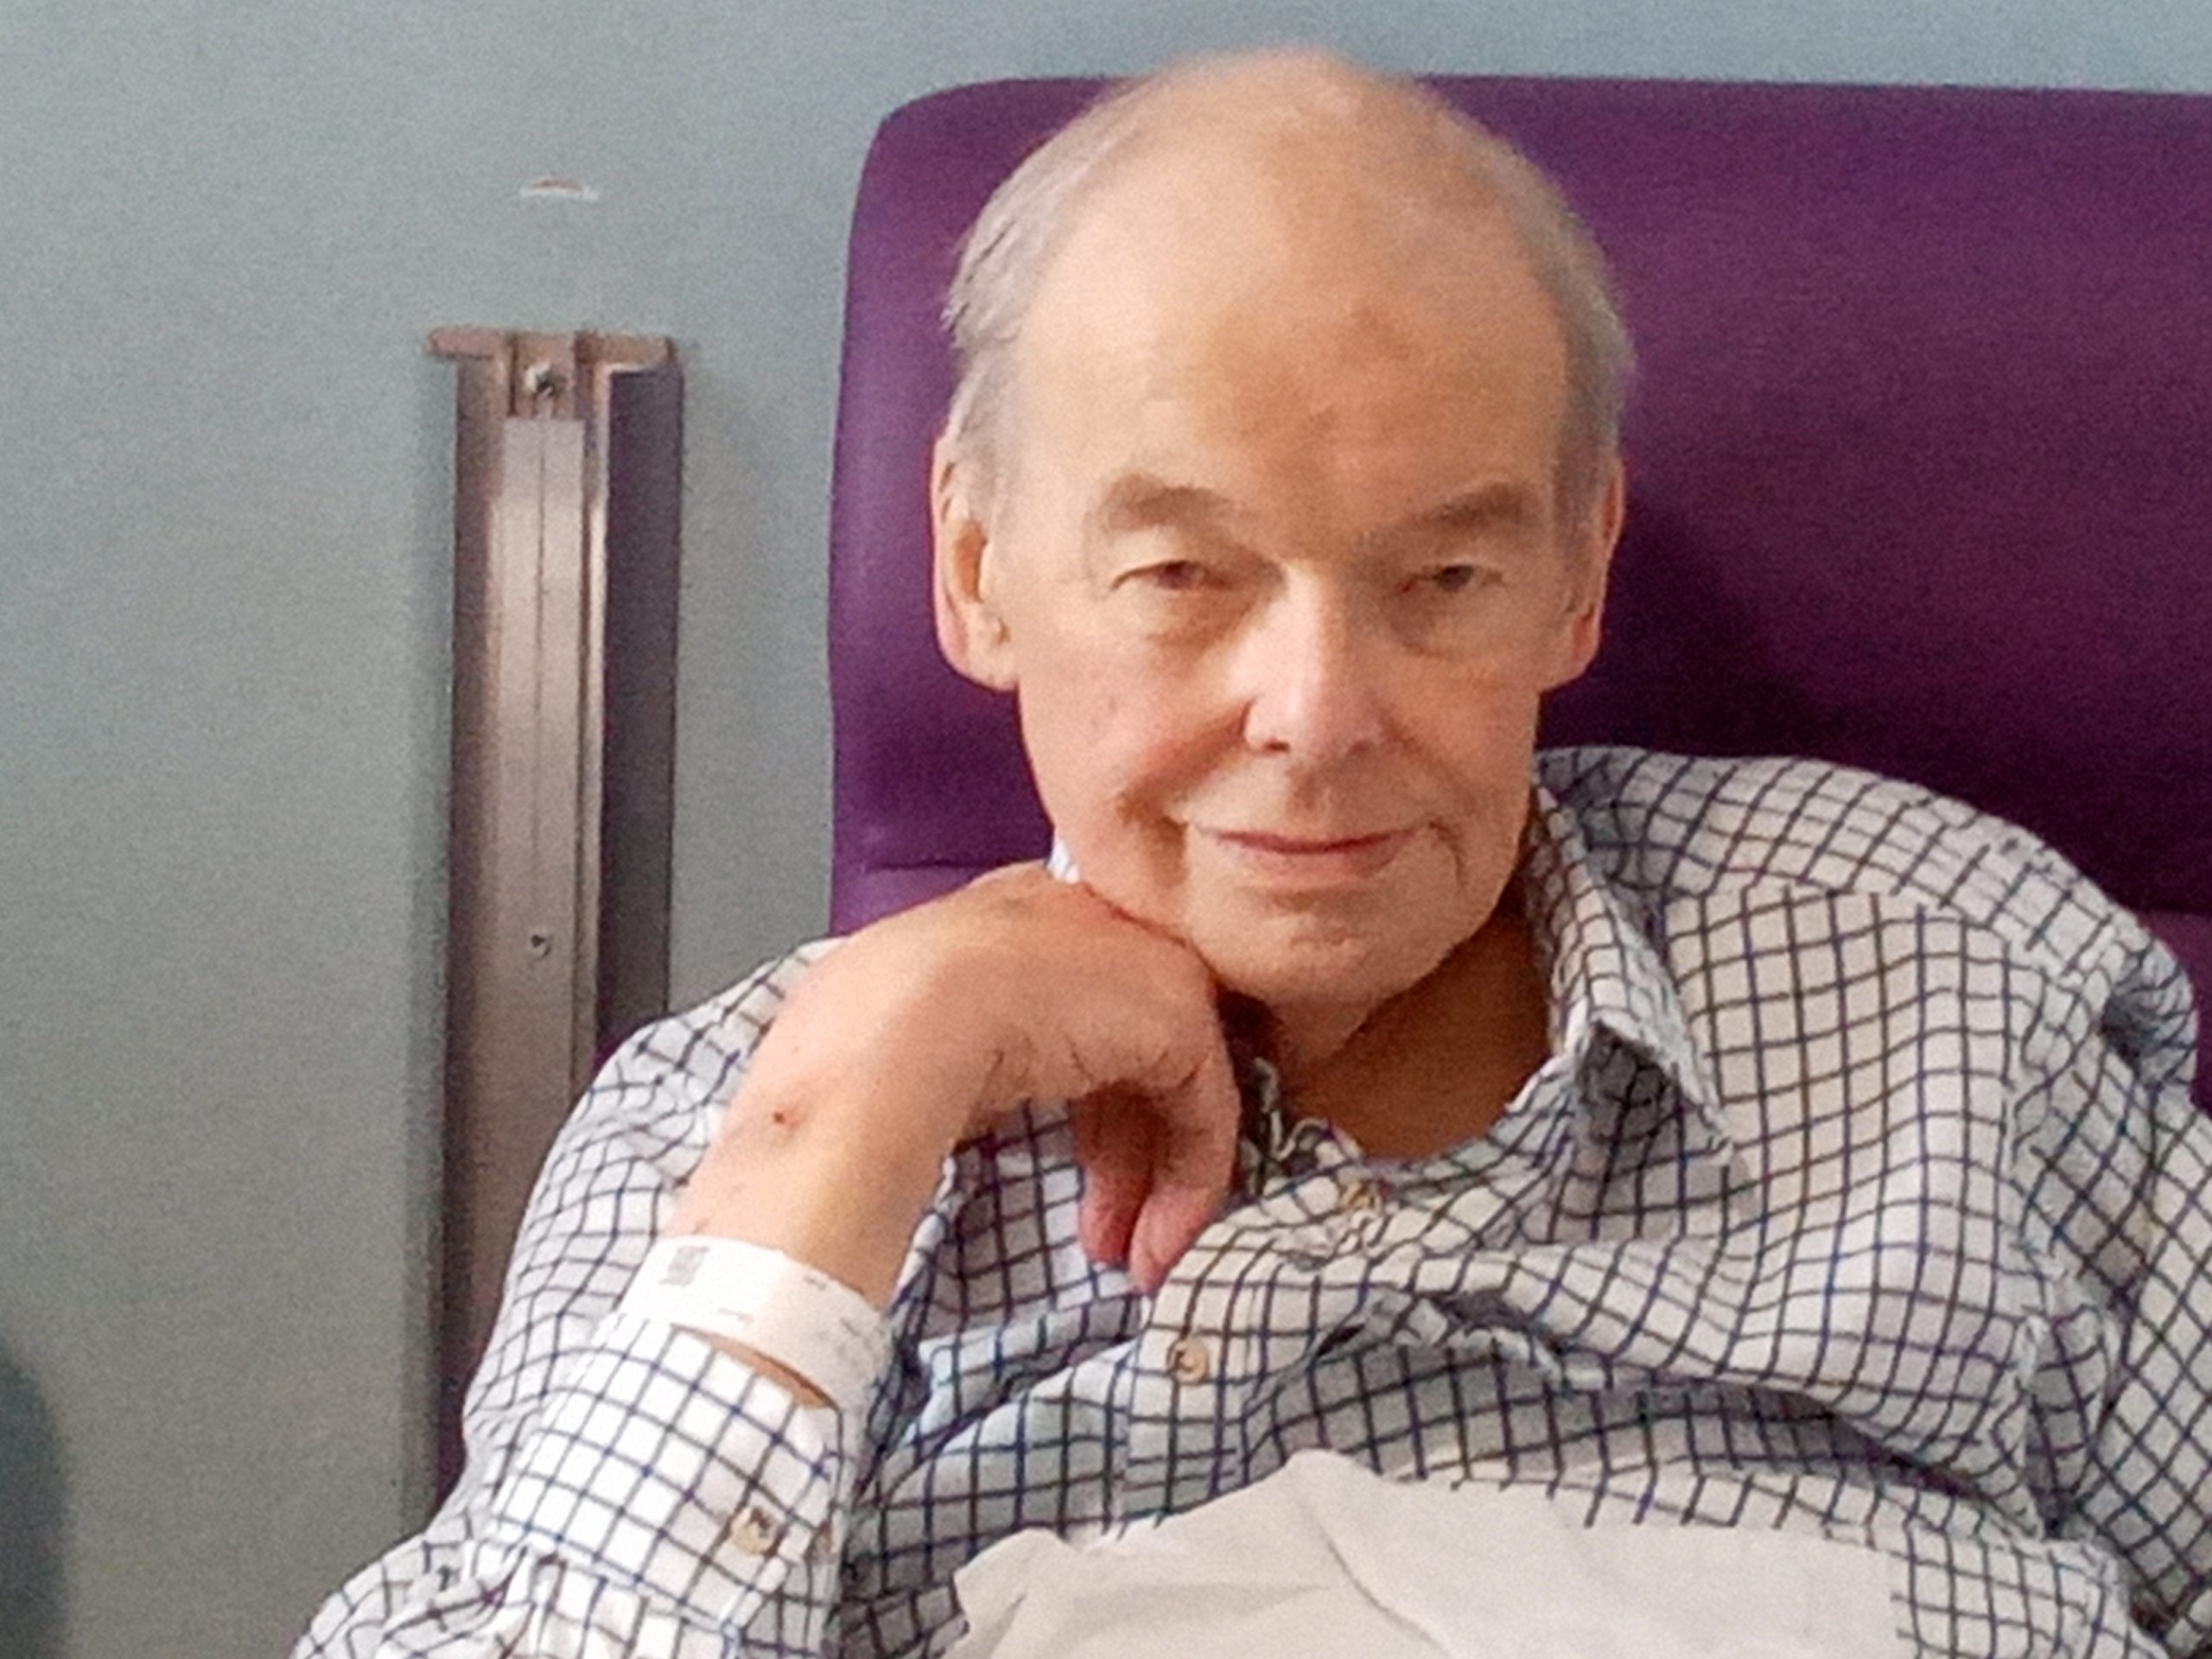 IN MEMORY | In memory of David Warr who sadly passed away aged 78-years-old